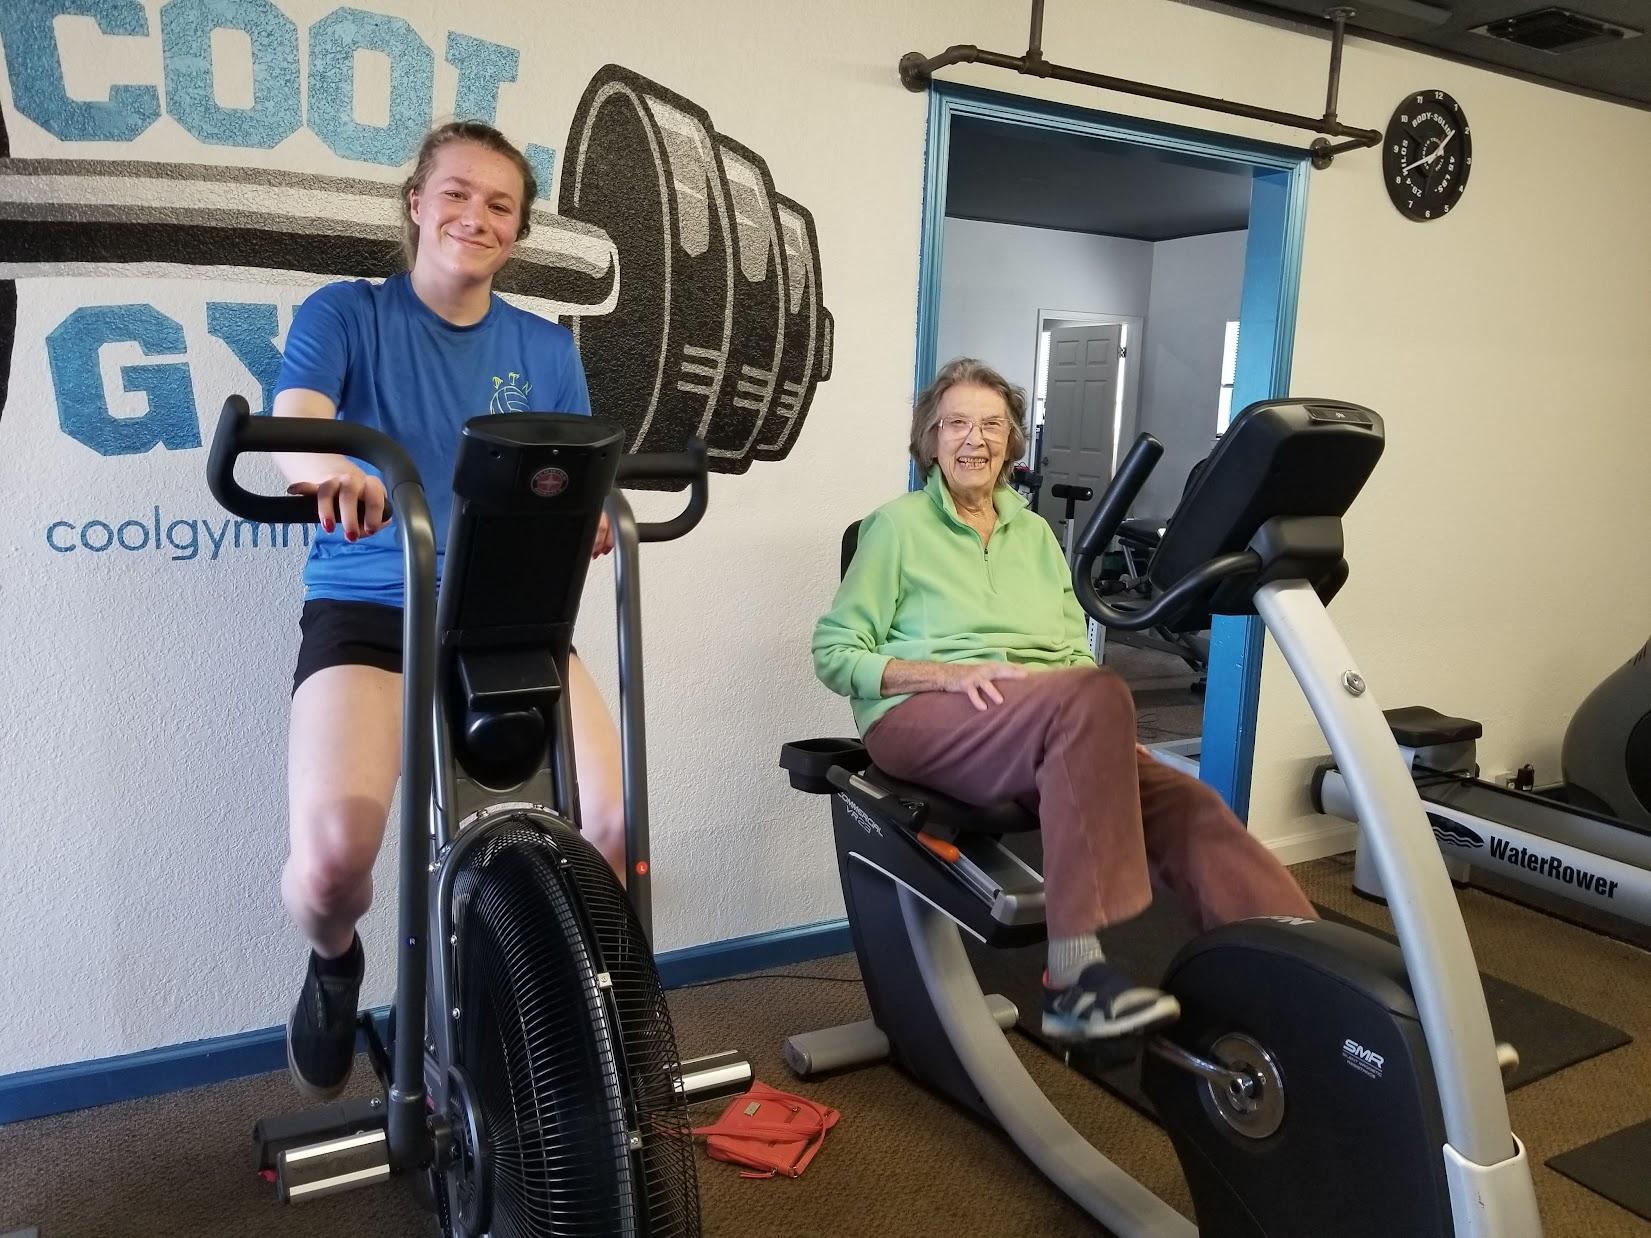 An image of a woman in a blue shirt on an exercise bike and a woman next to her in a green sweater on an bike.